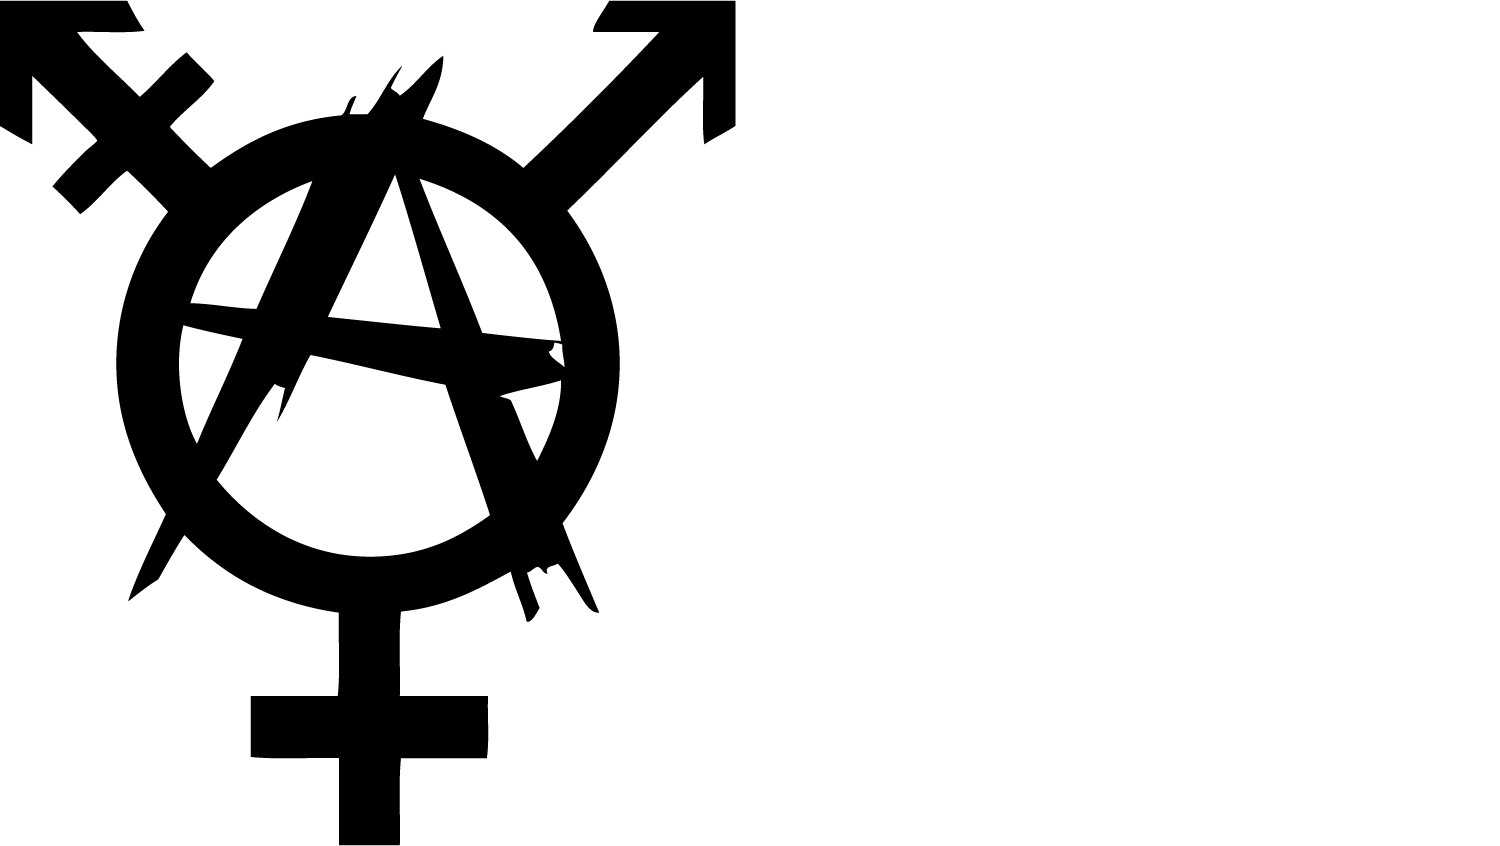 Anarchy PNG Image File